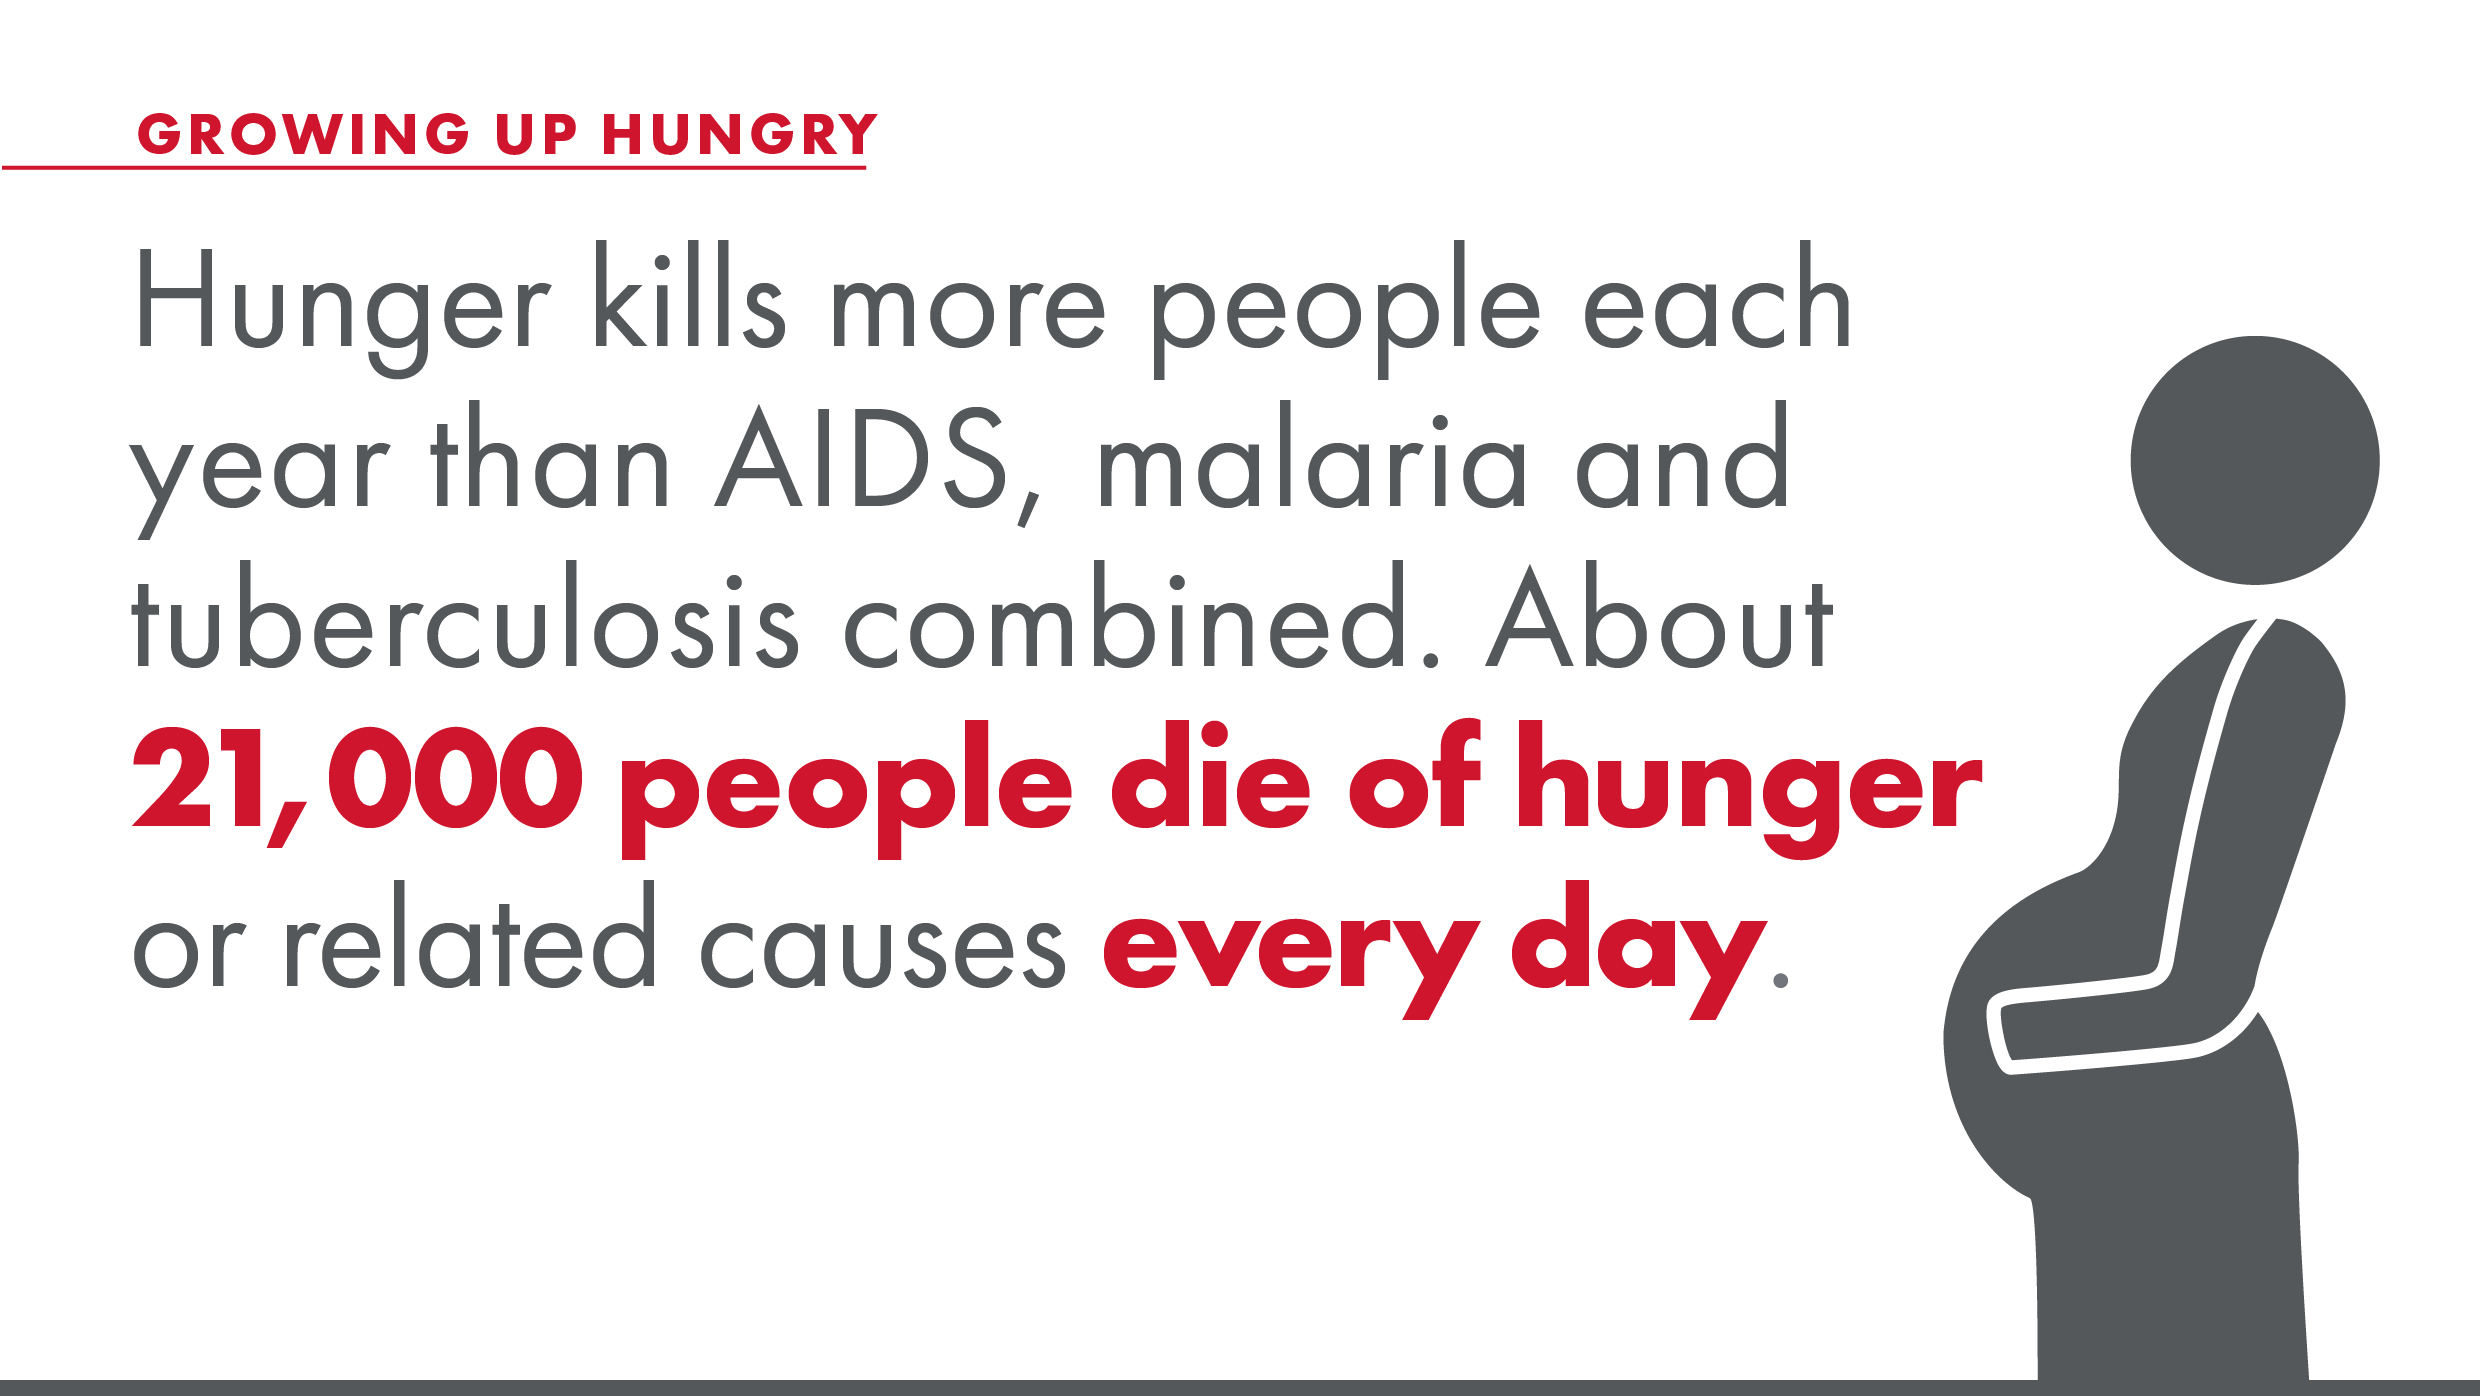 Hunger kills more people each year than AIDS, malaria and tuberculosis combined. About 21,000 people die of hunger or related causes every day.